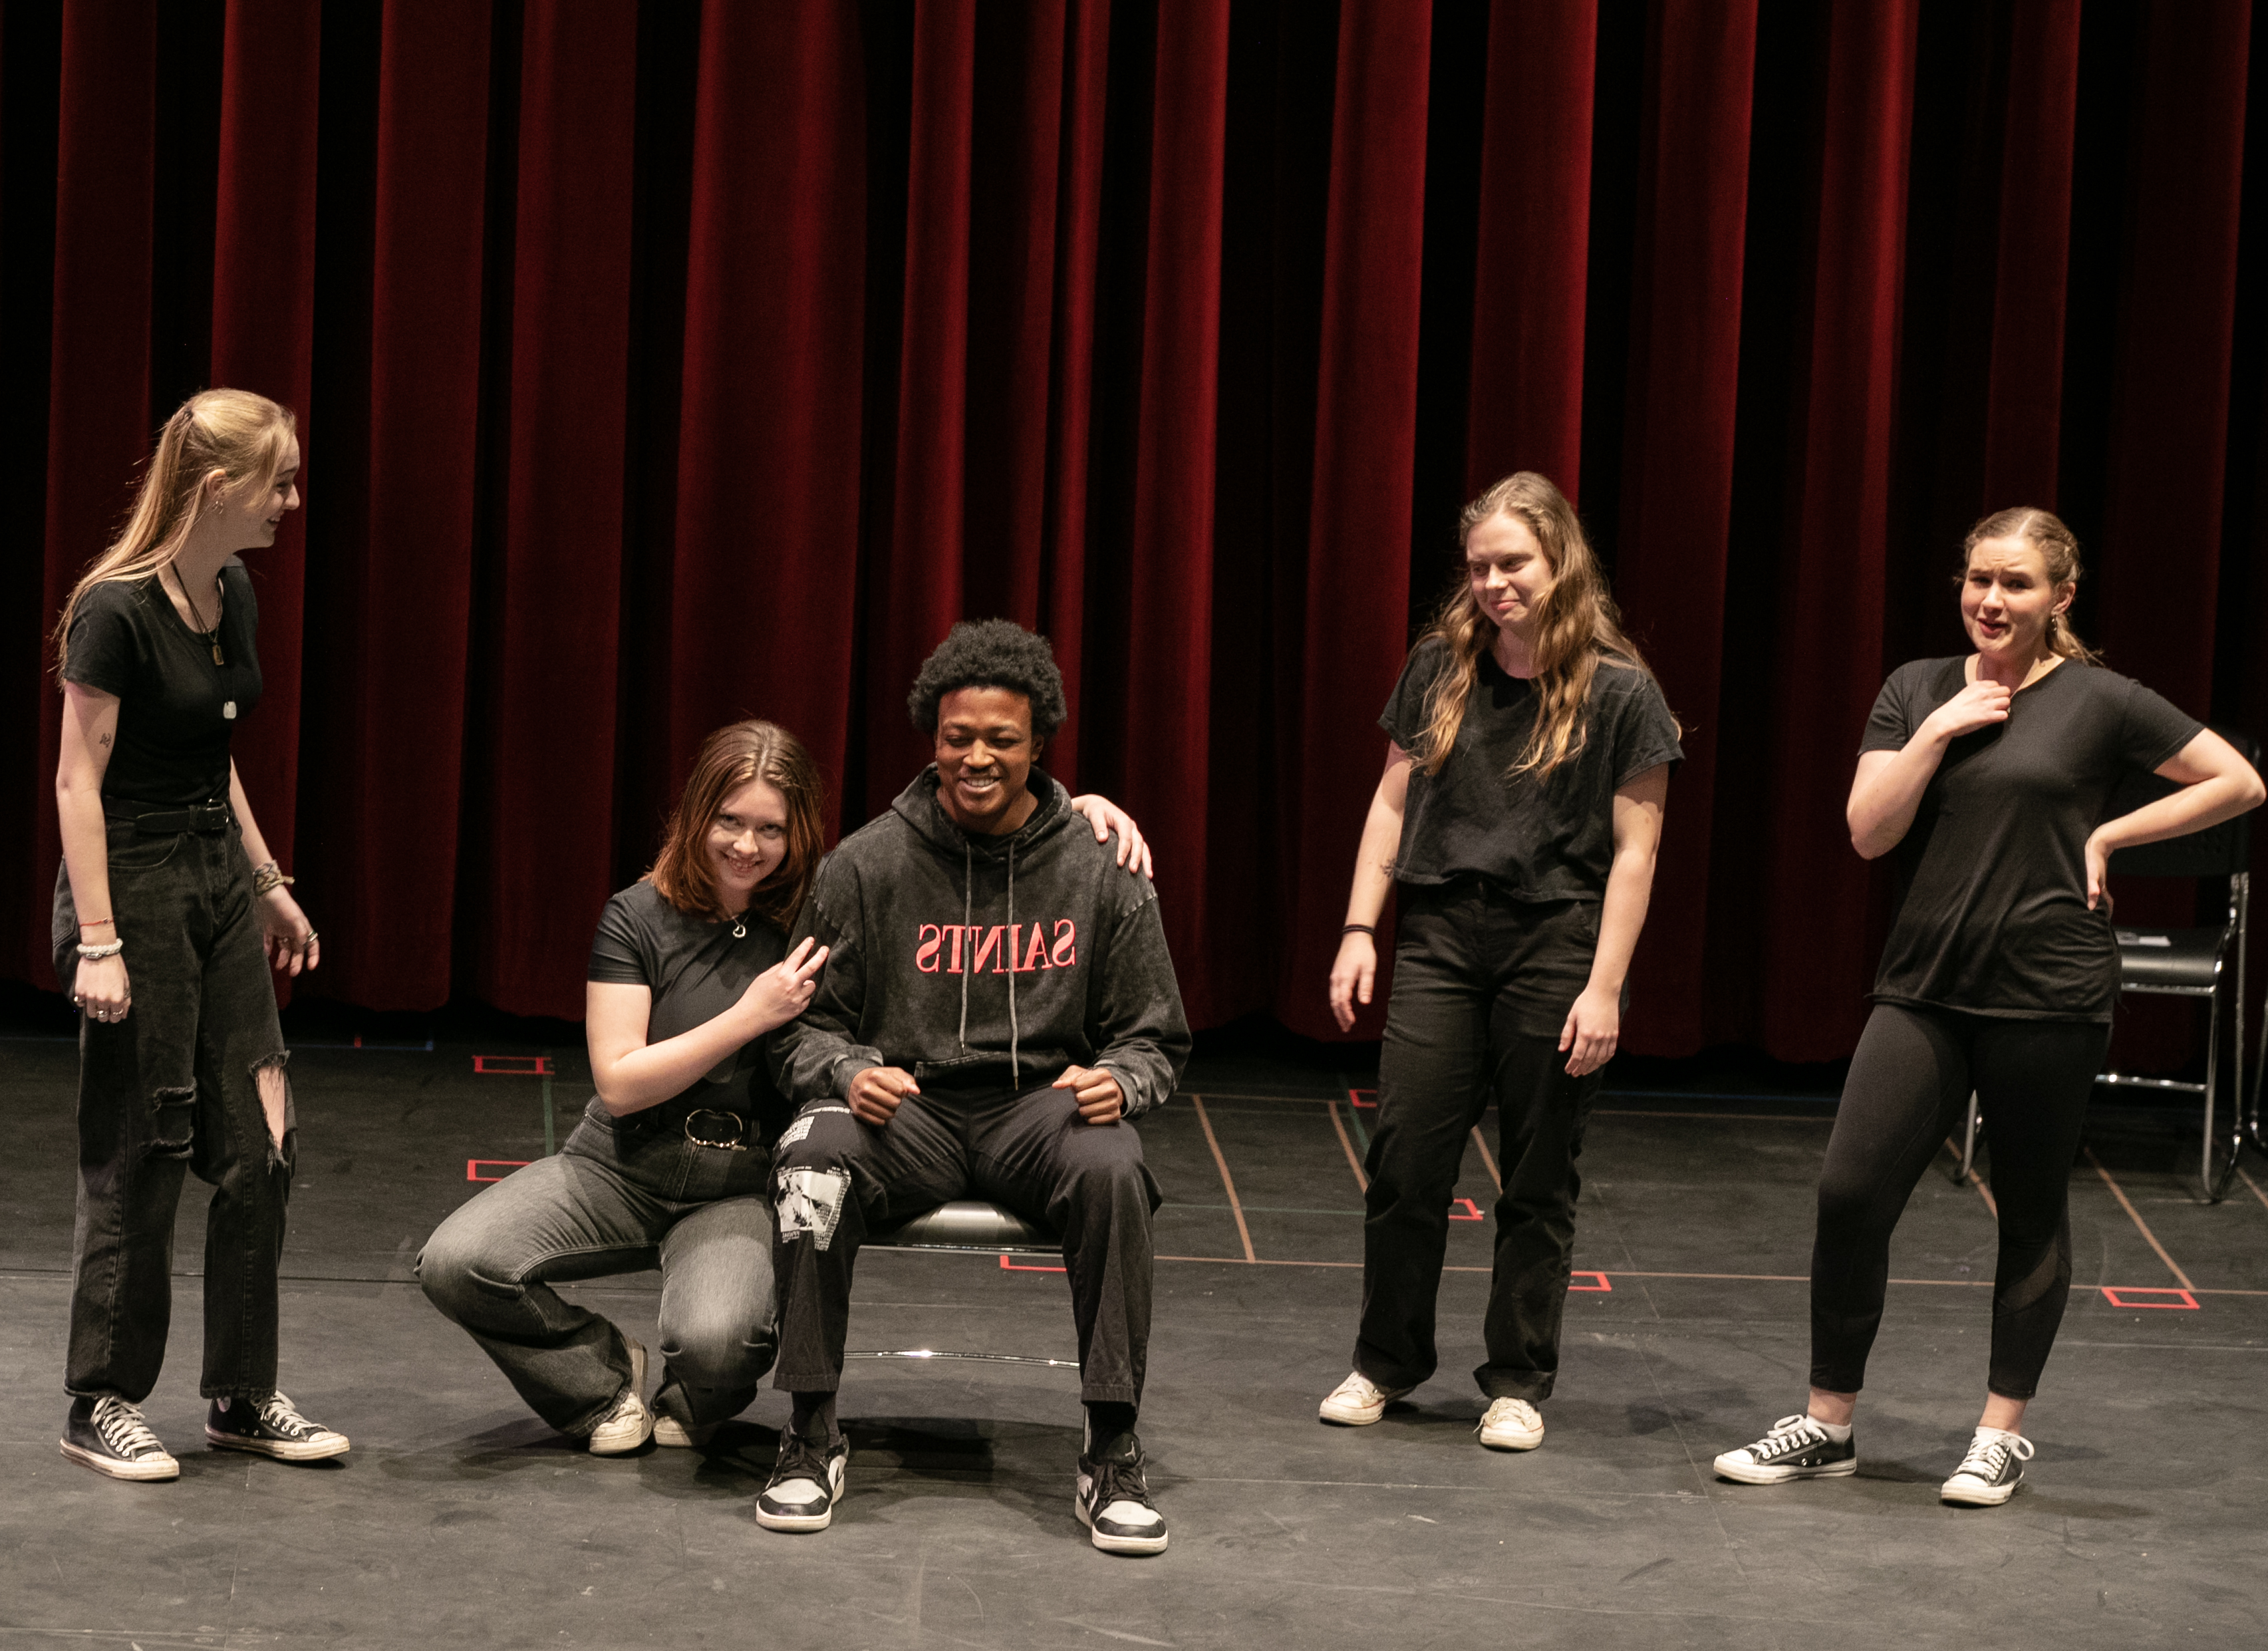 The Sketchies, a student comedy club, perform at Comfest on Saturday, Feb. 11.